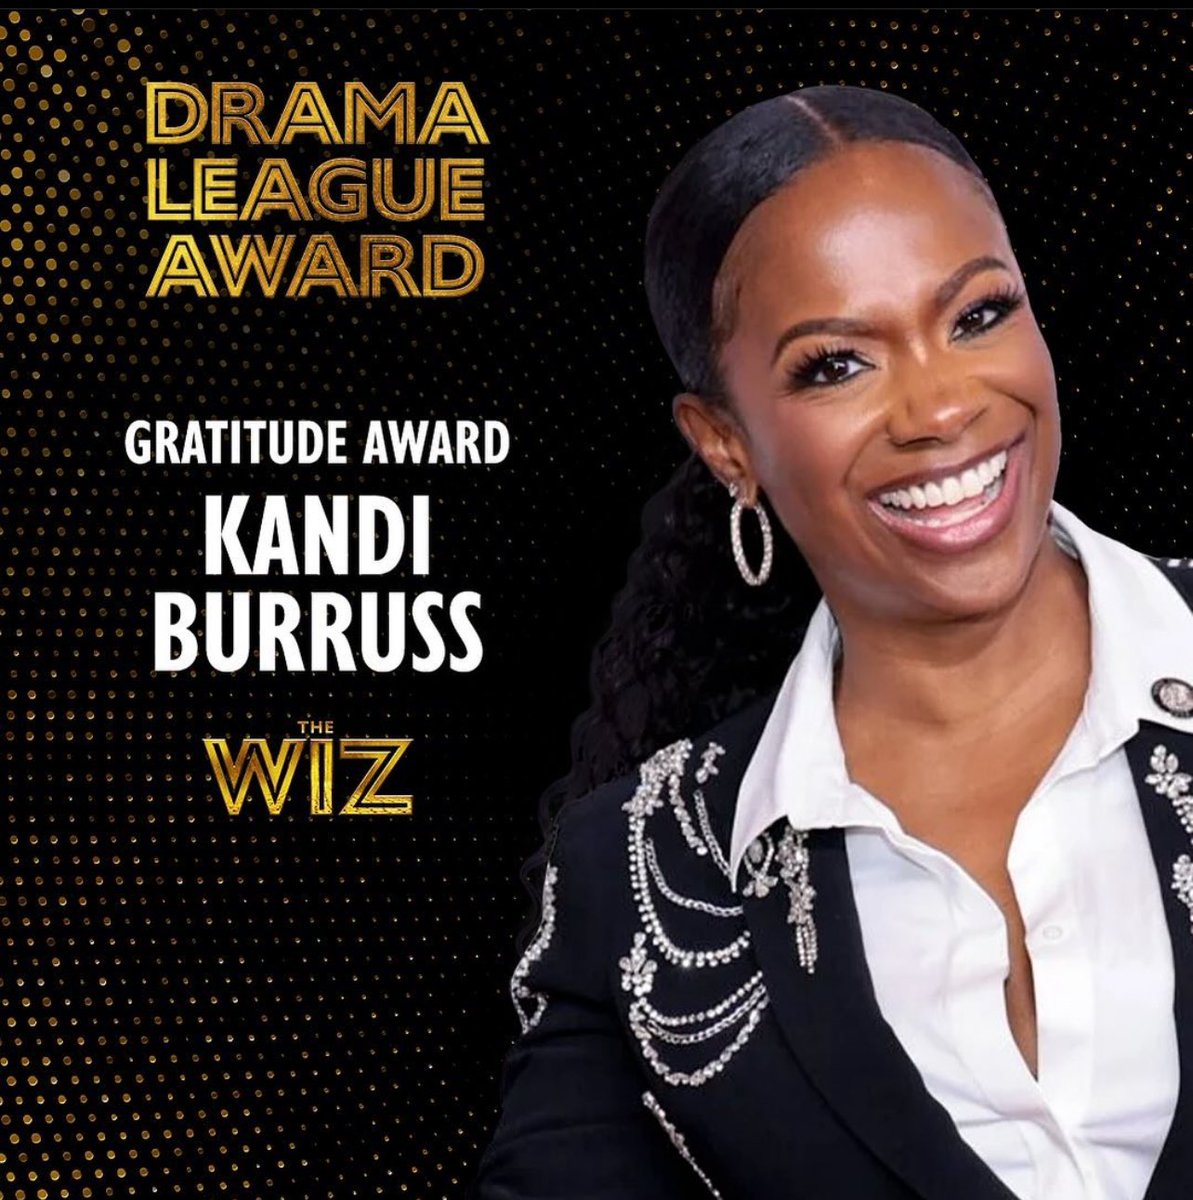 Congratulations to Kandi Burruss for being awarded the “Gratitude Award” at this years Drama Desk Awards. #thewiz #win #rhoa